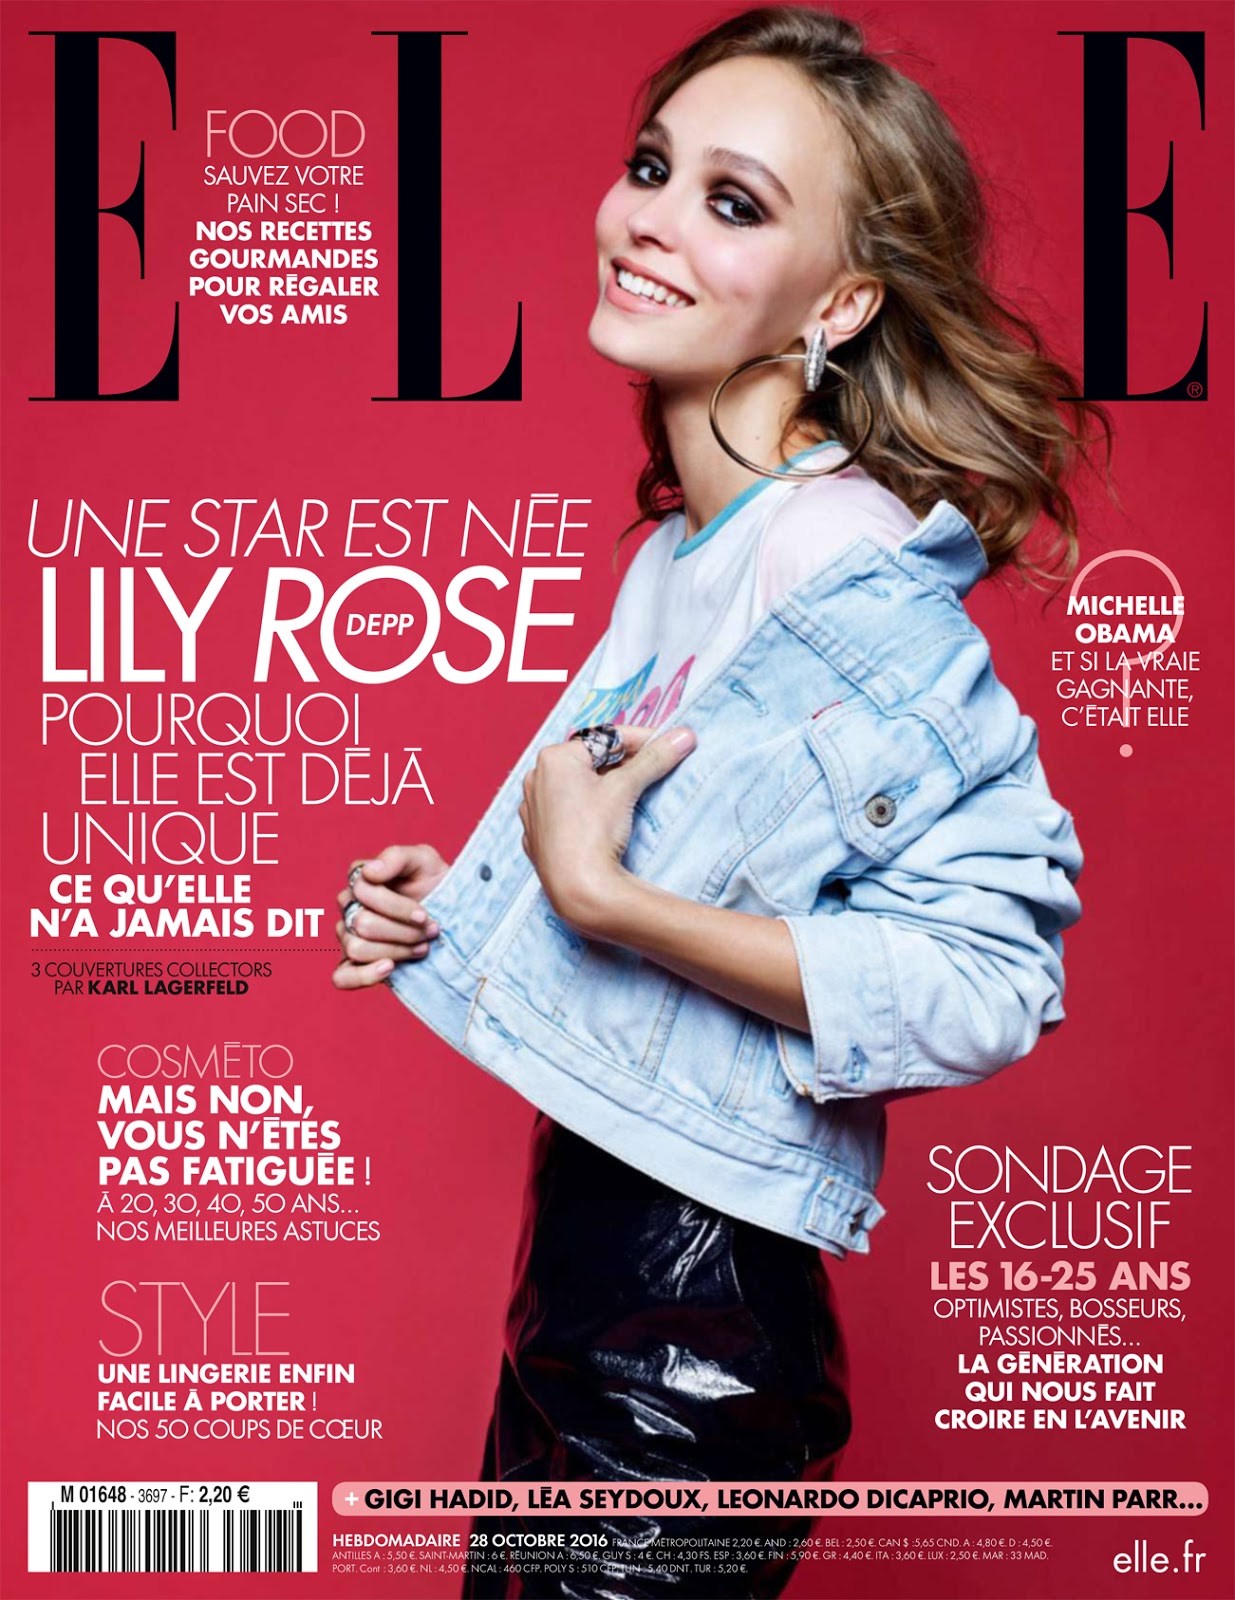 Lily-Rose Depp in Elle France October 28th, 2016 by Karl Lagerfeld